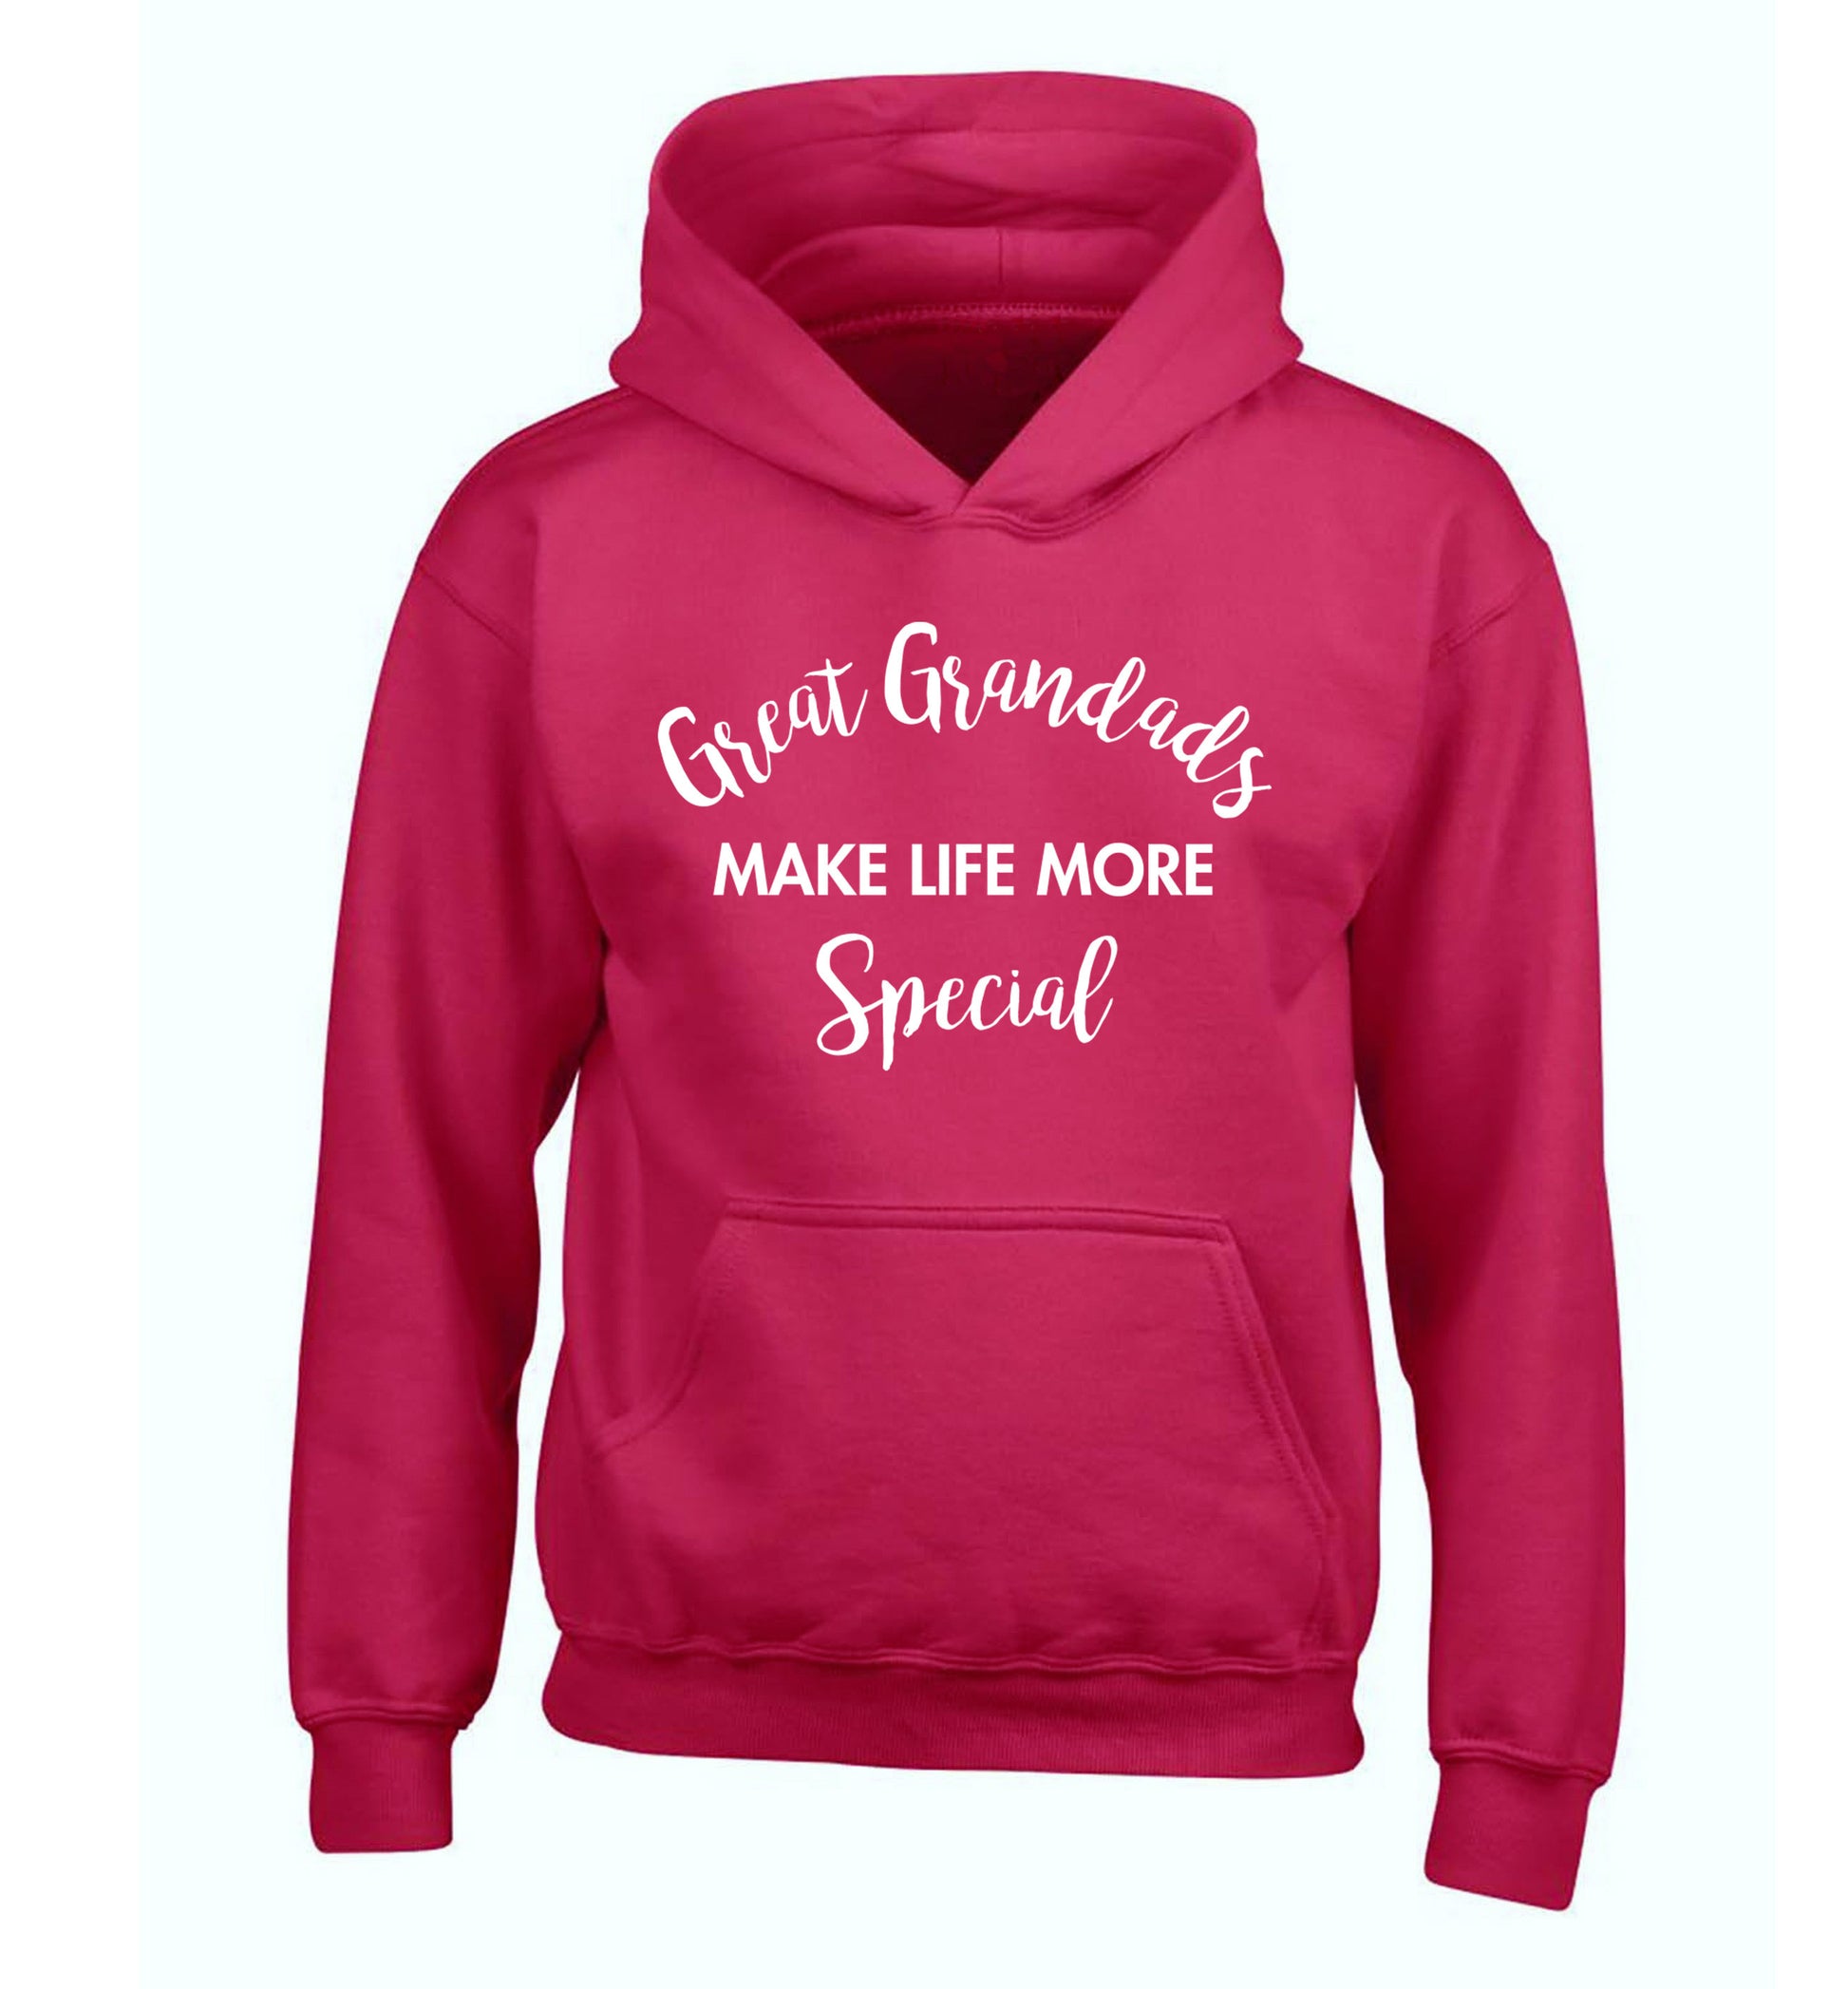 Great Grandads make life more special children's pink hoodie 12-14 Years